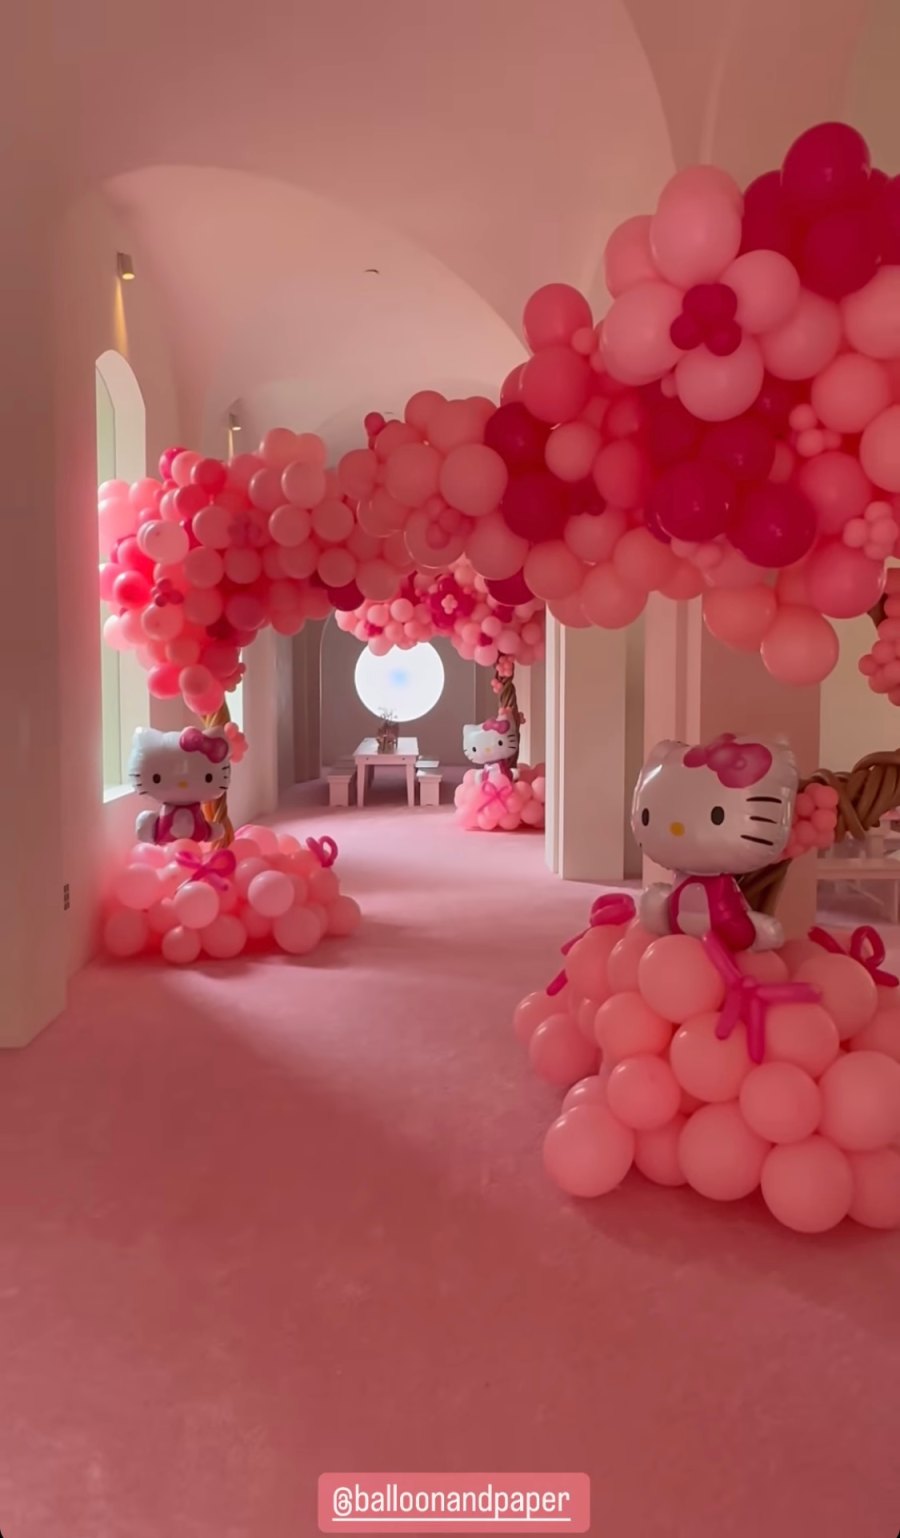 Chicago West Hello Kitty party